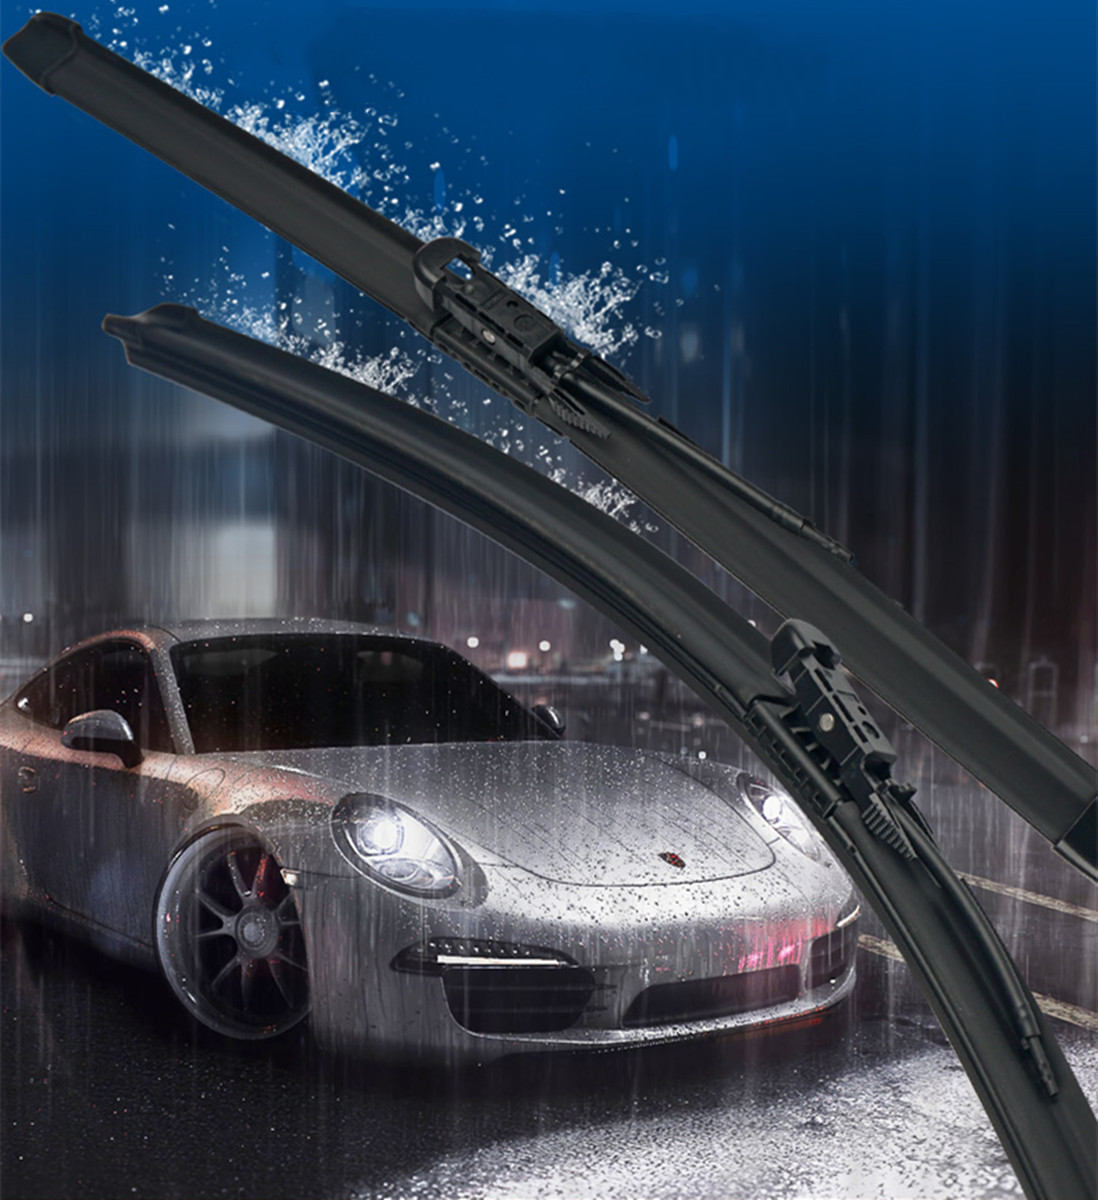 model x wiper blade replacement